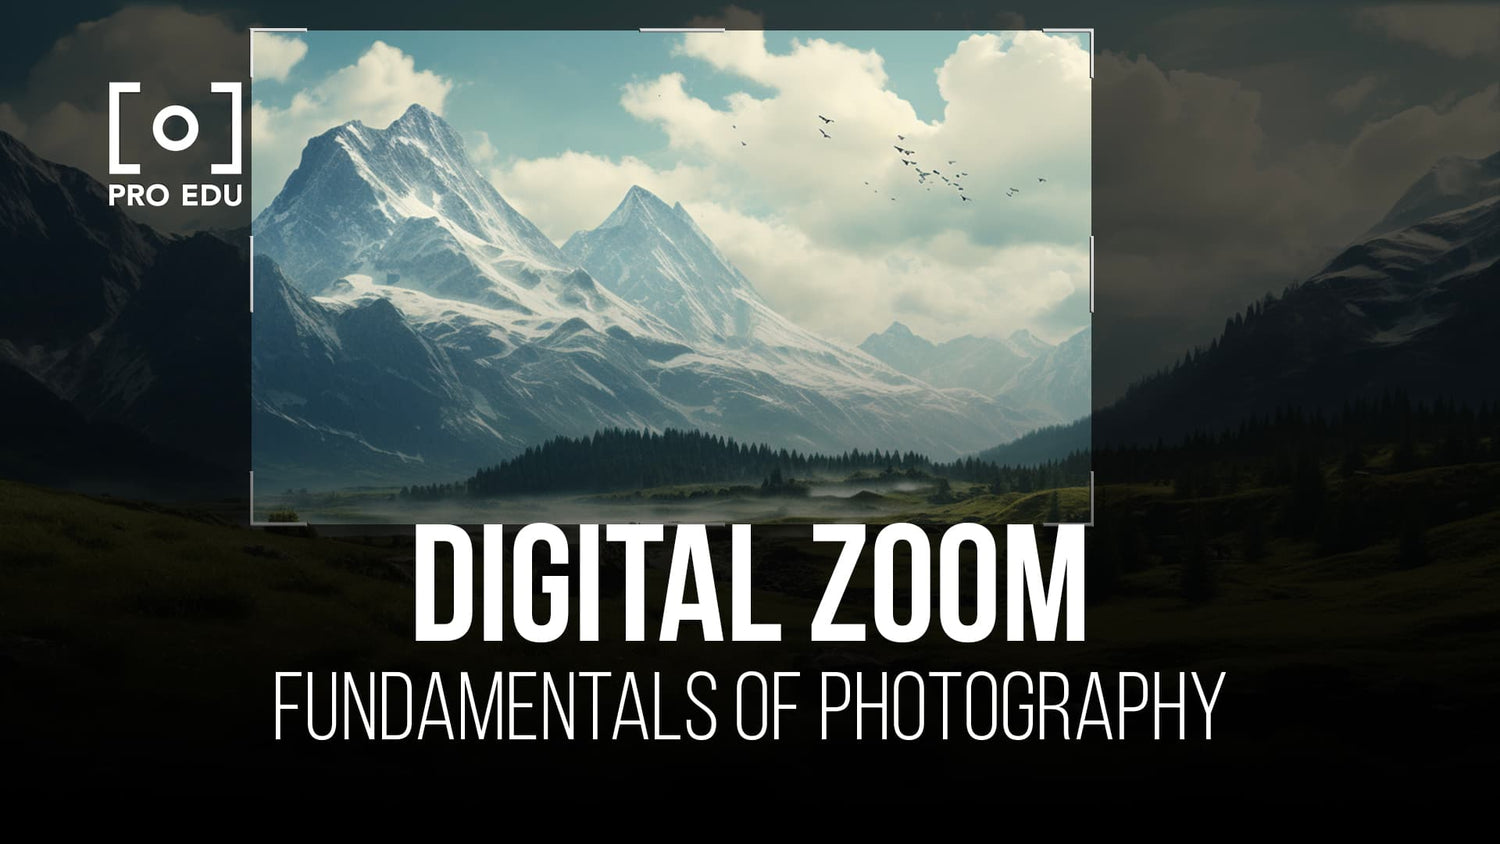 A beginner's guide to understanding and using digital zoom in photography